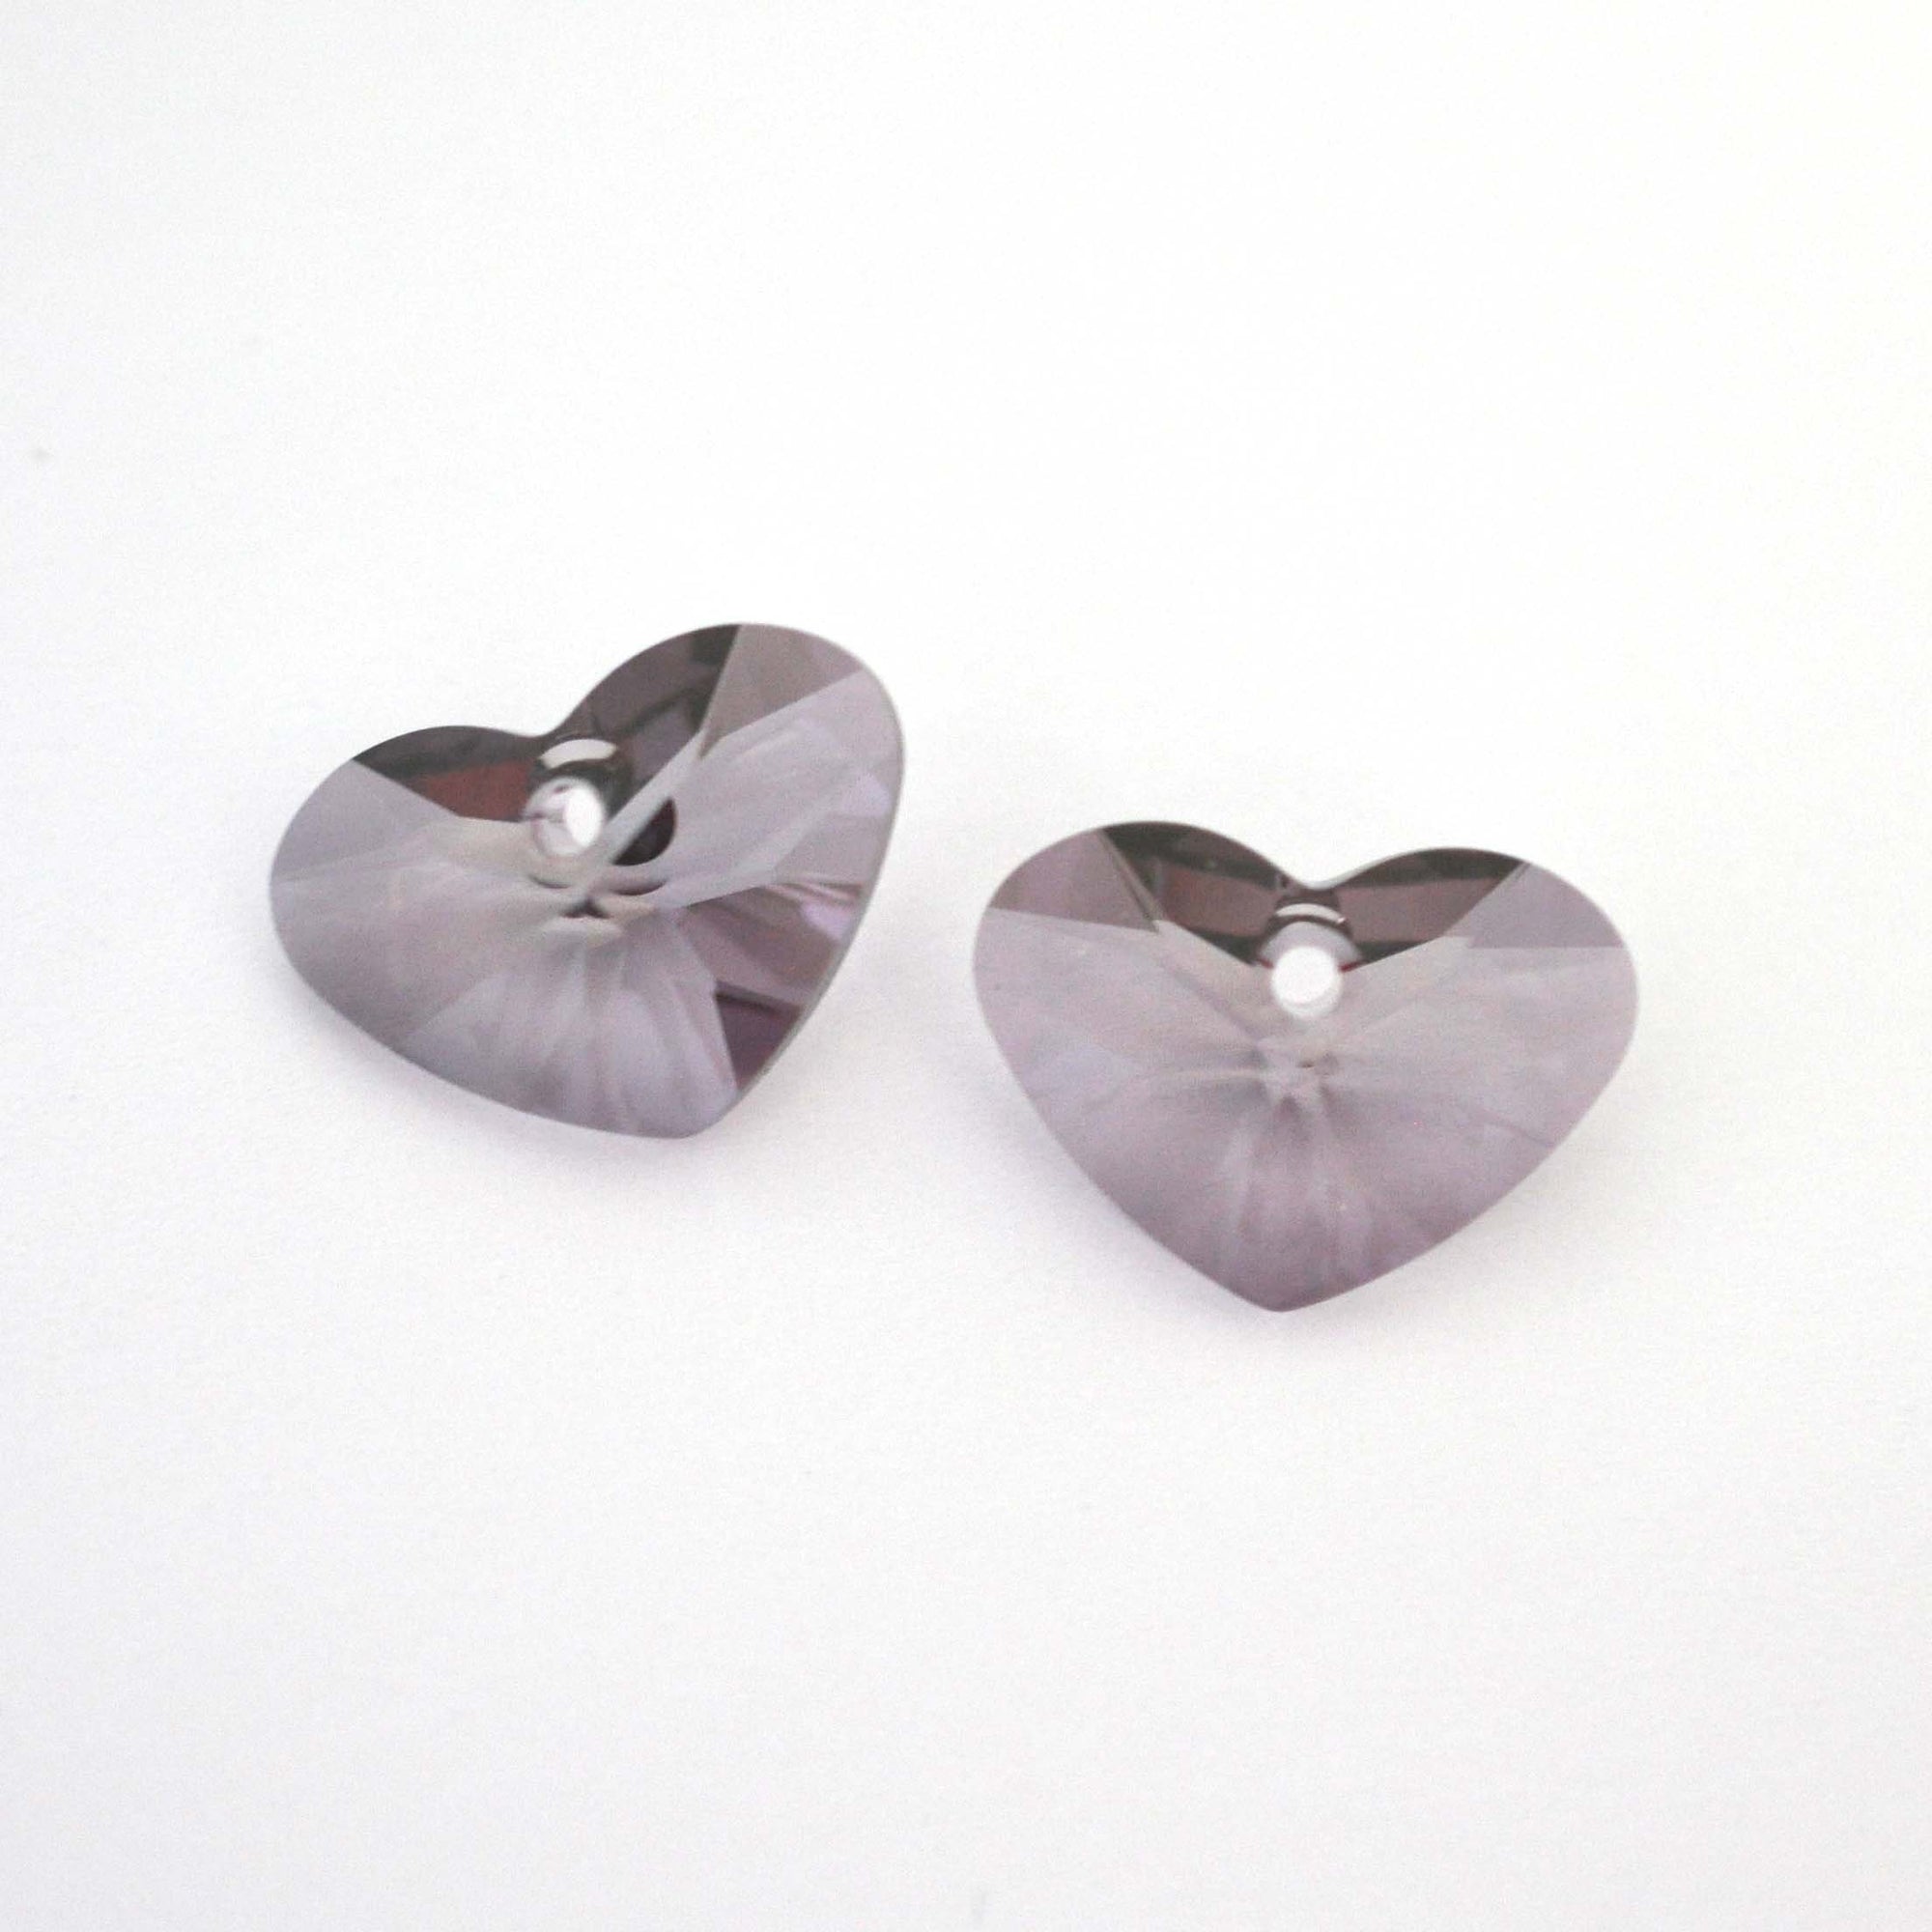 Antique Pink Forget-Me-Not Heart Pendant 17mm 6260 Barton Crystal - 1 Pair (2 Pieces)